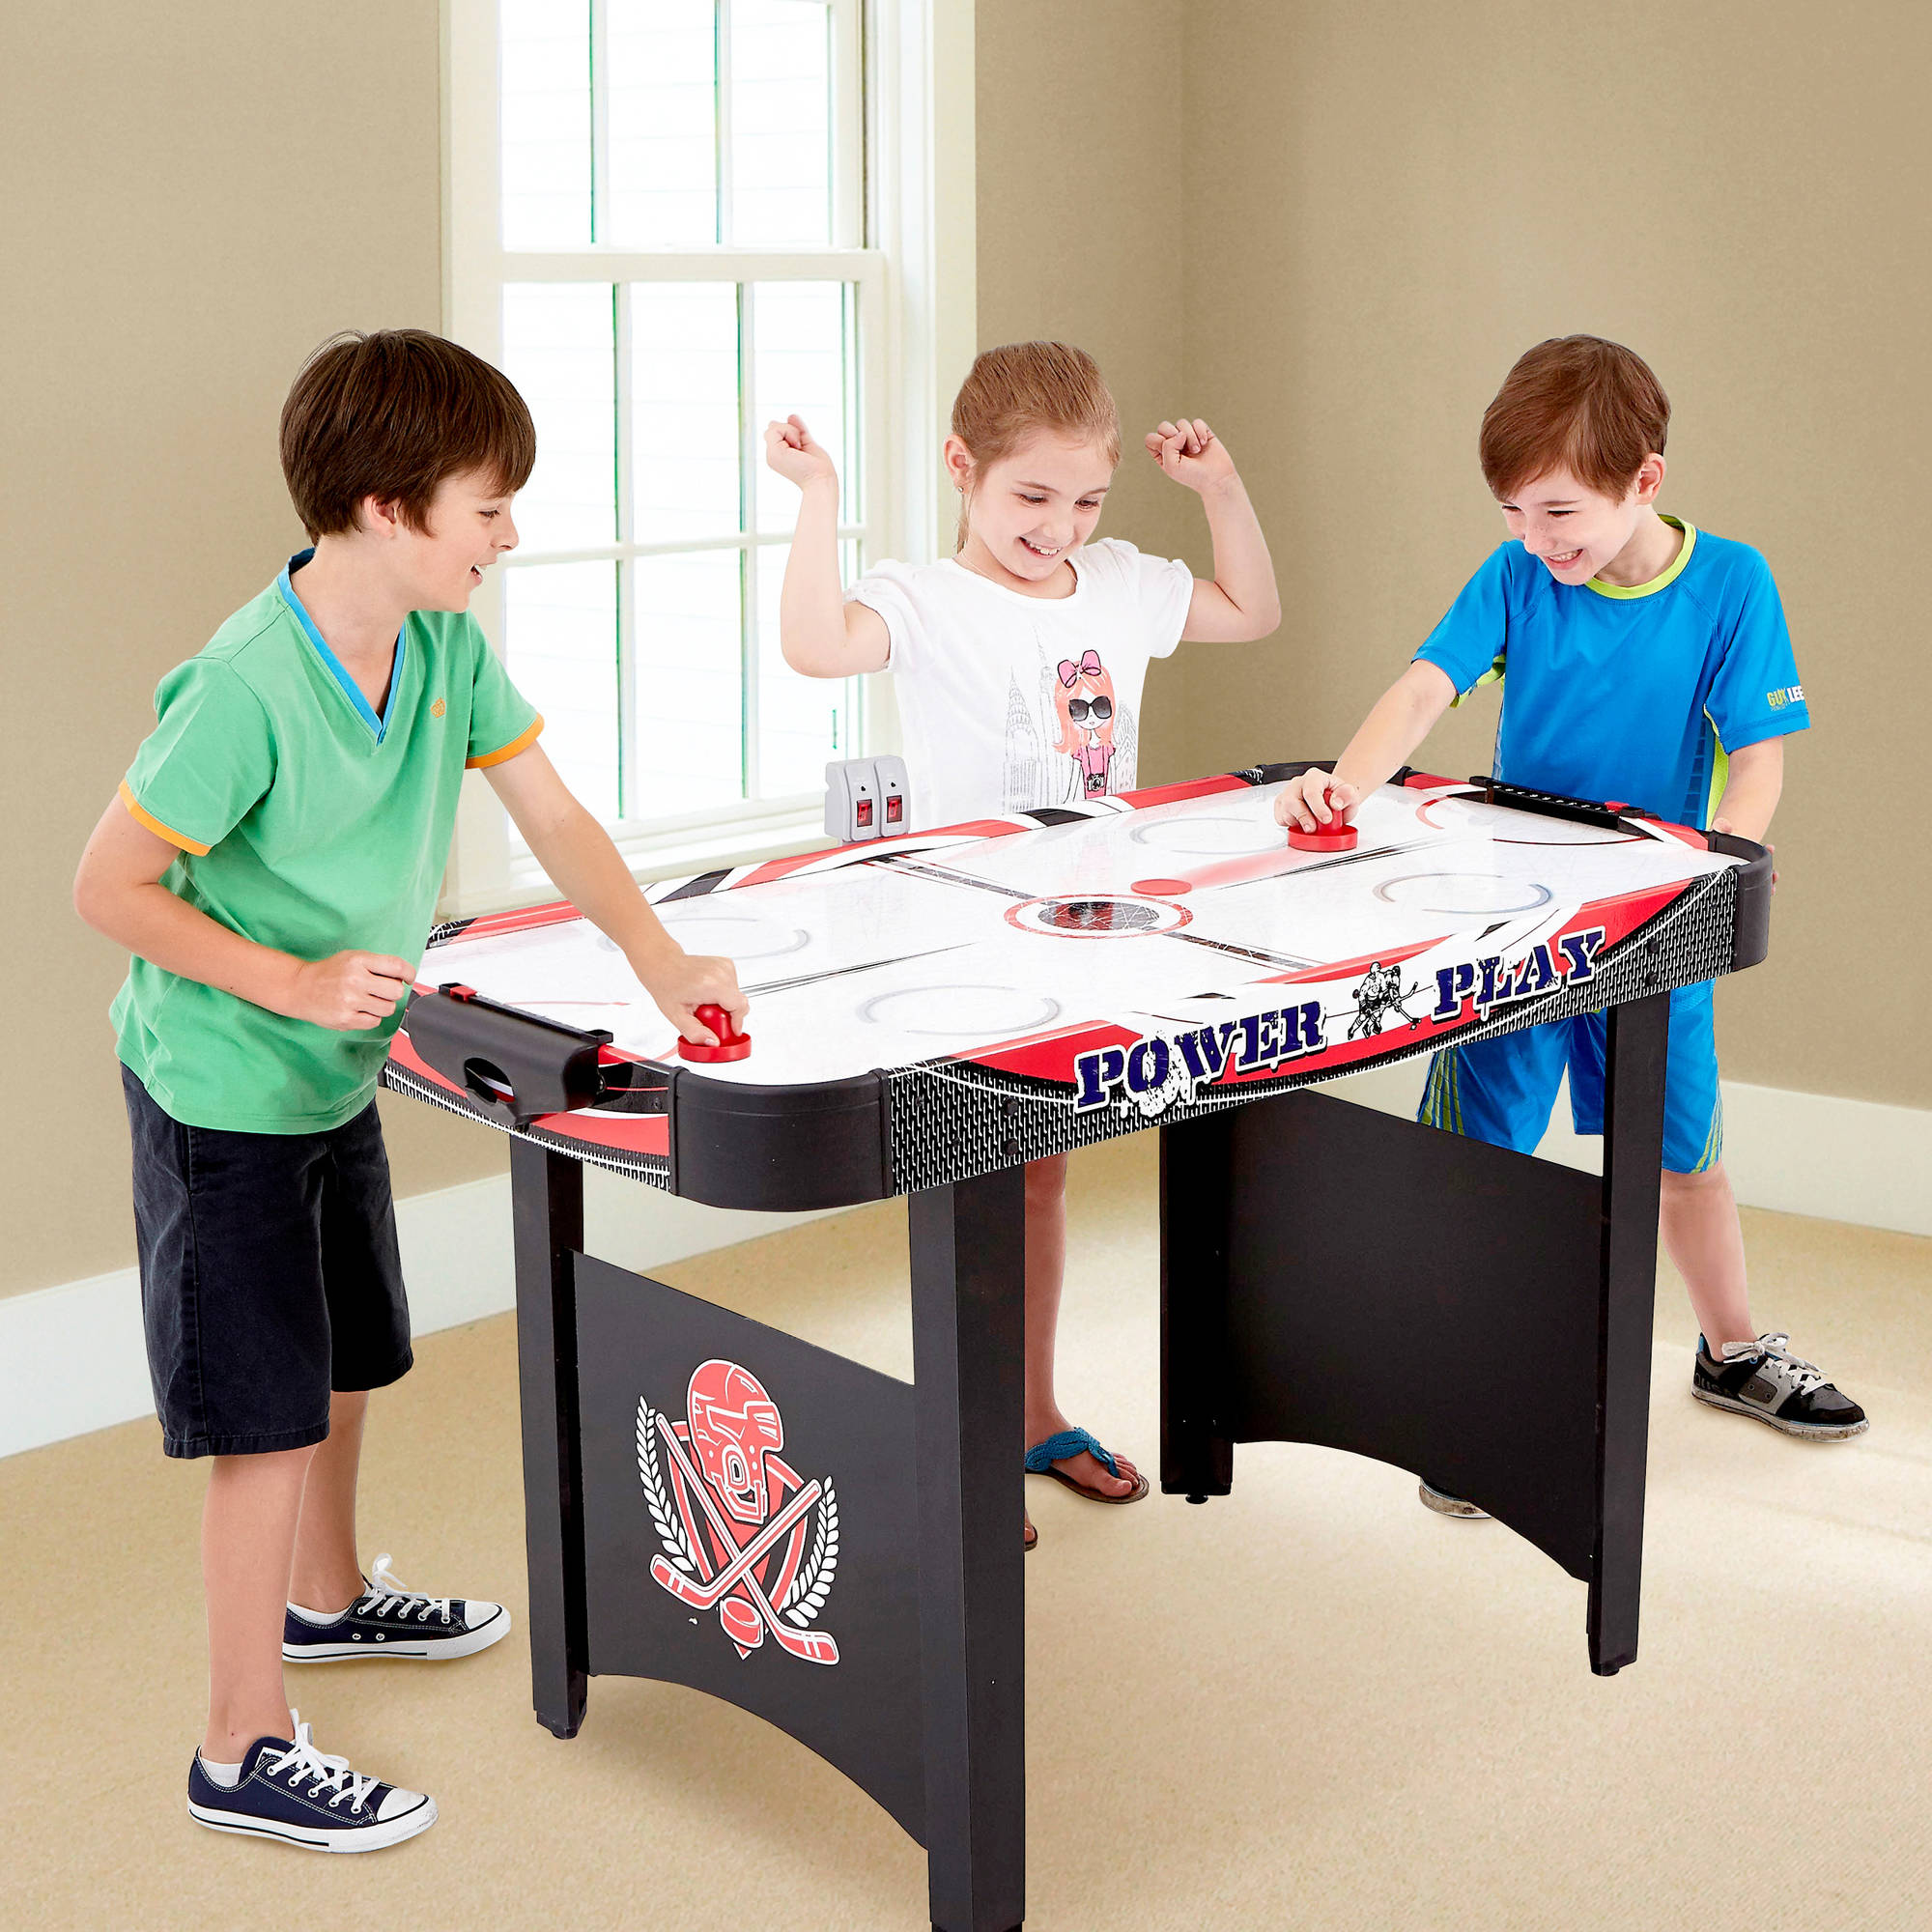 48" Air Powered Hockey Table - image 1 of 6